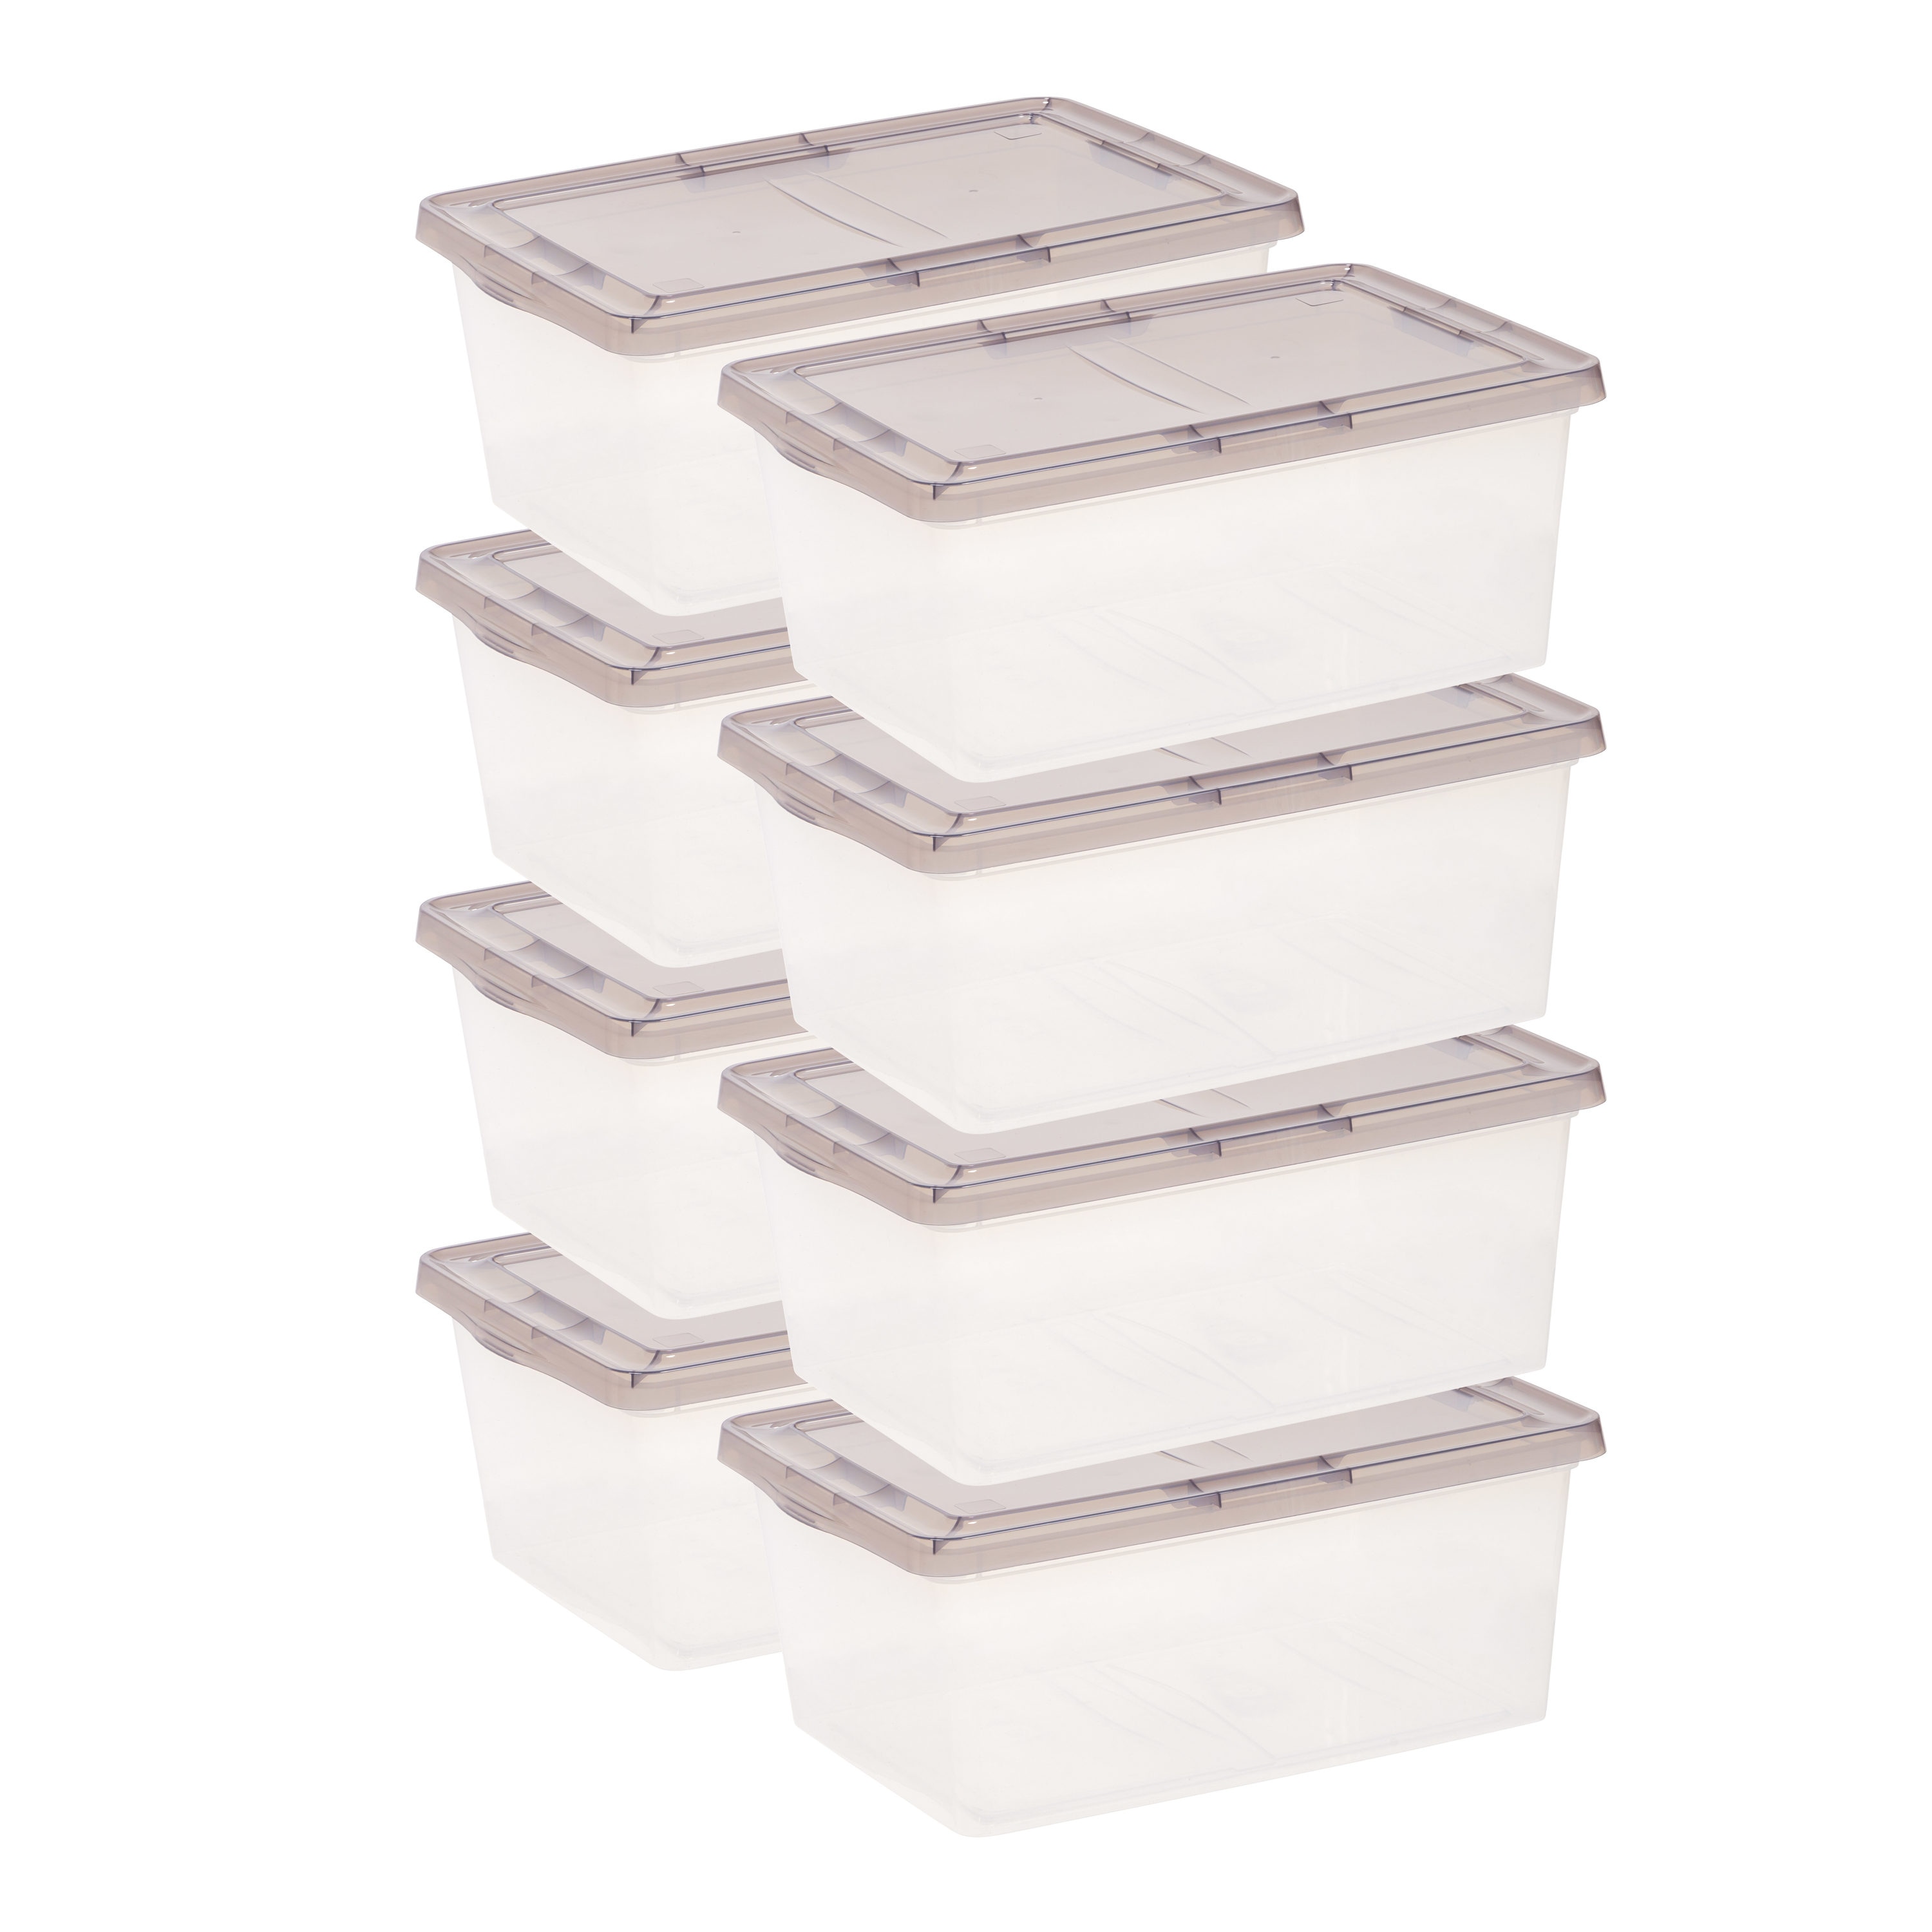  IRIS USA 24 Wreath Storage Container With Latches and